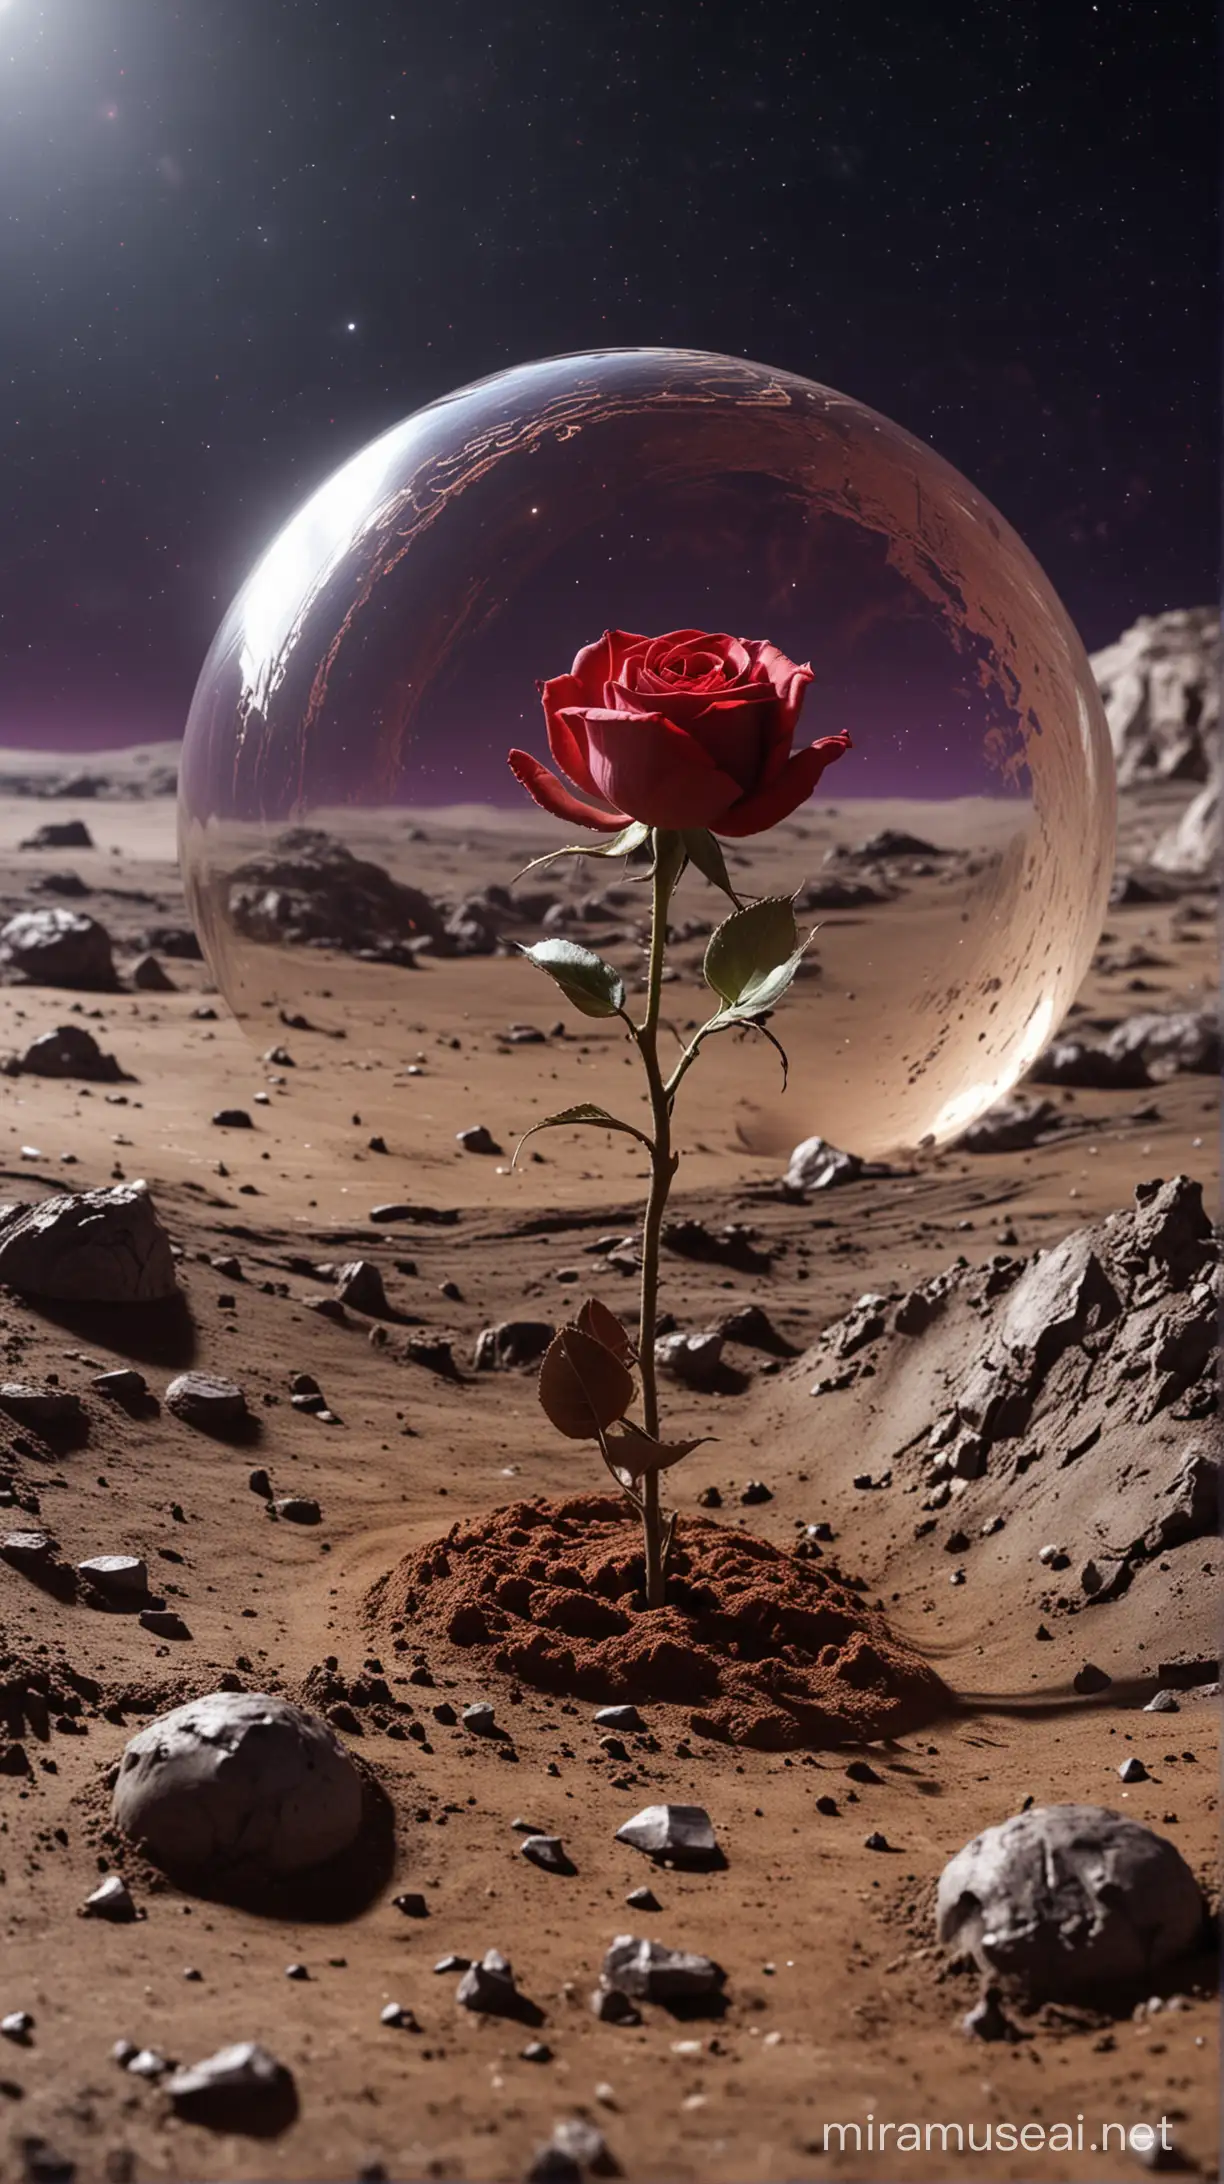 A moon like planet of brown color in space. There is a glass dome on the top-left side of the planet. A red rose is growing under the dome. The dome is cracked on top-right side. Some small debris and sand is scatered around the planet in saturn shape form. The whole scene is slightly lit from bottom-right side in violet color.